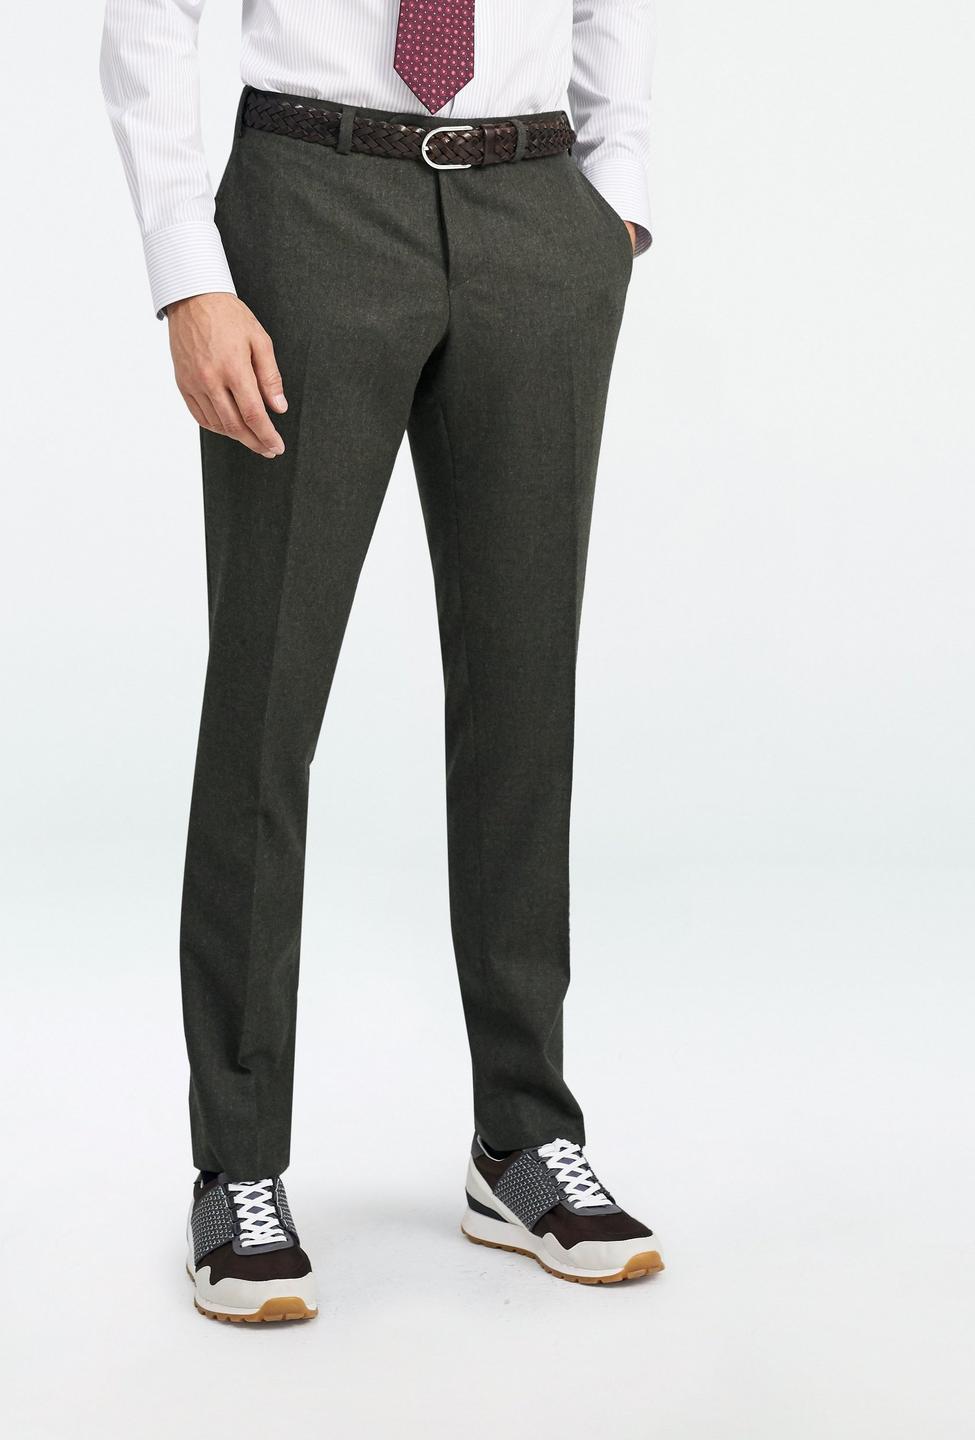 Olive pants - Hayward Solid Design from Luxury Indochino Collection